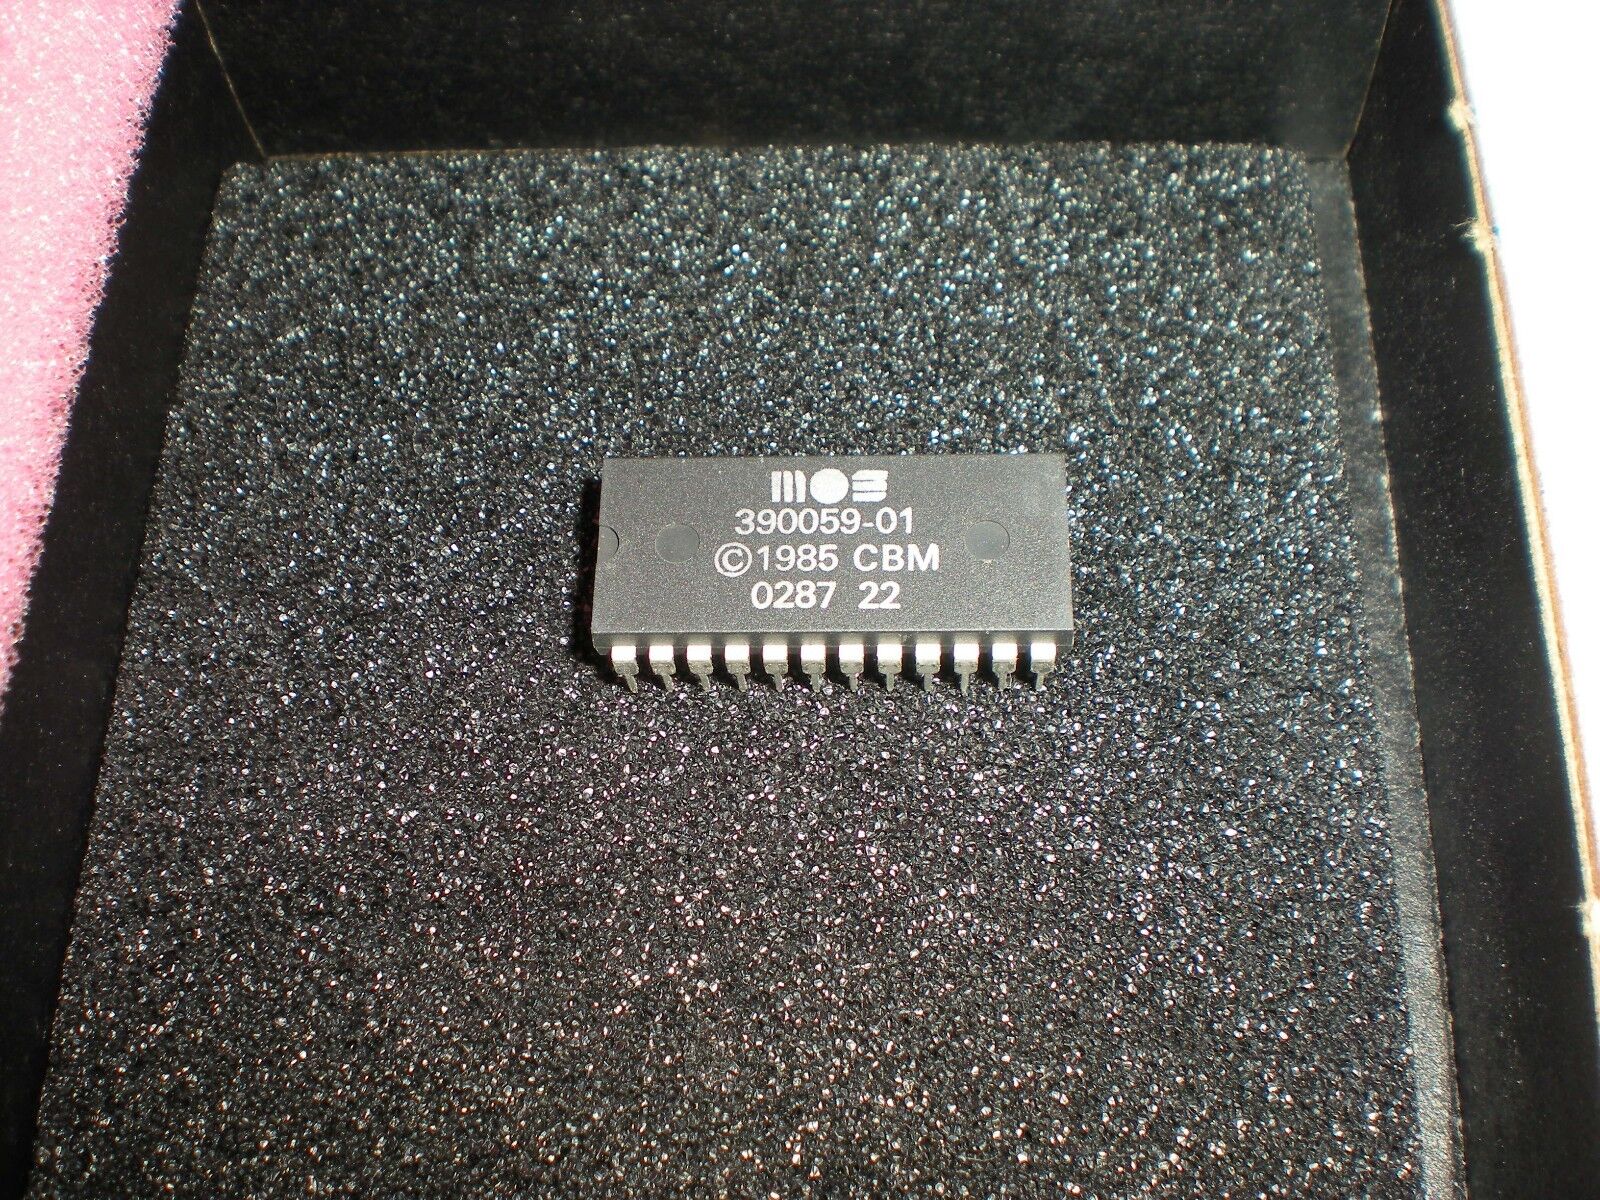 MOS 390059-01 character rom IC 40-column chip for Commodore 128